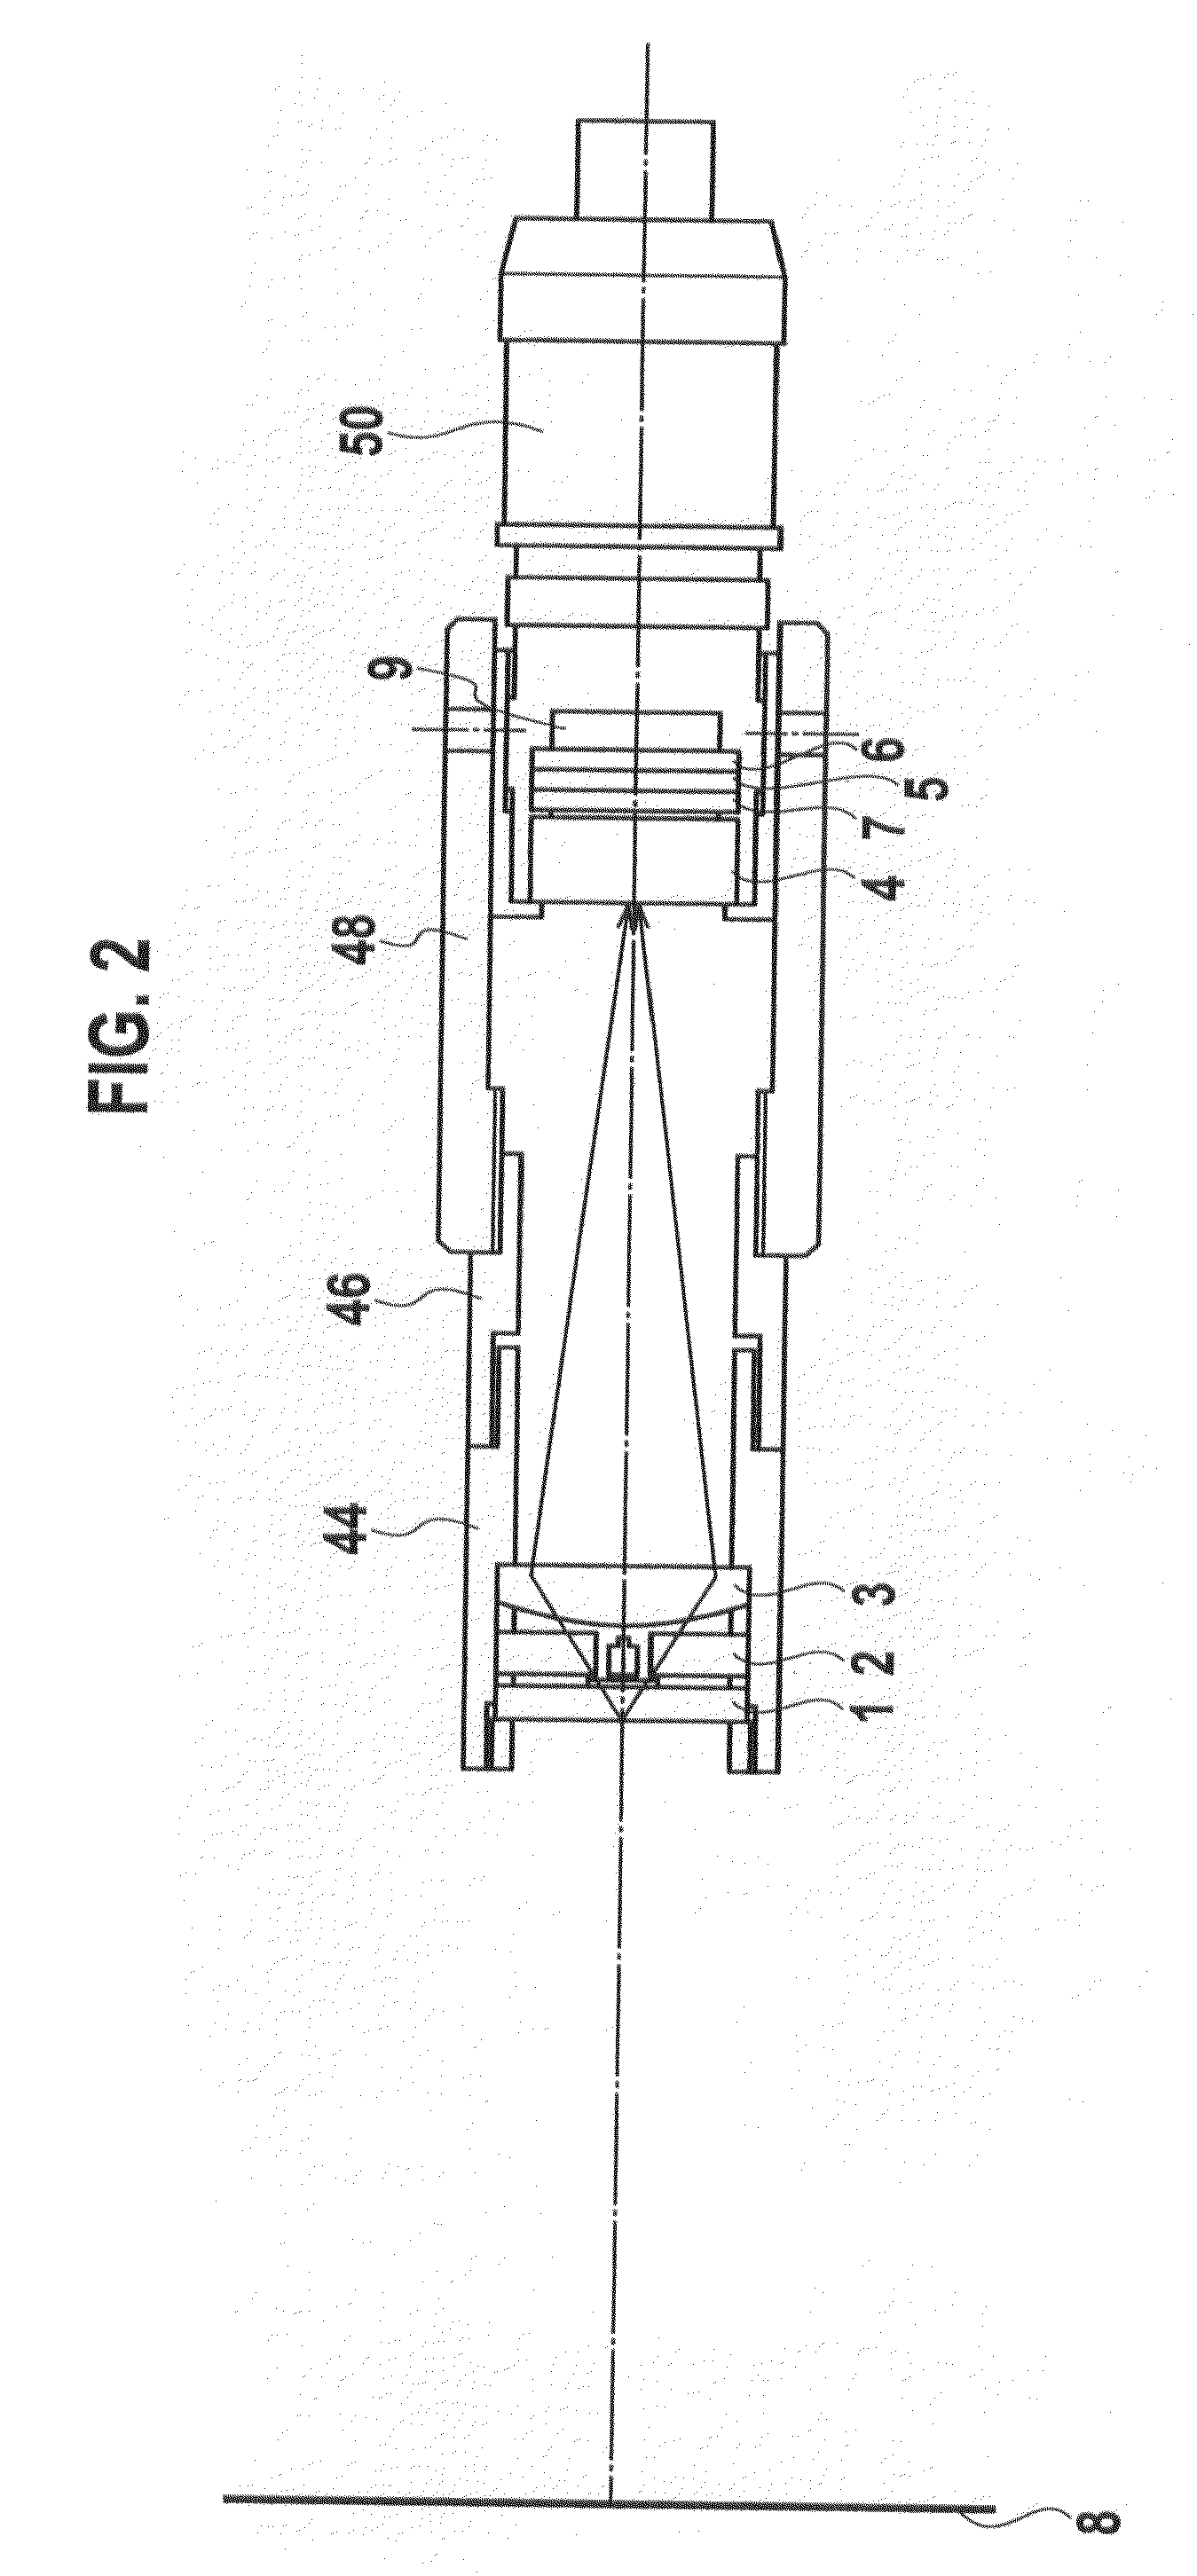 Welding observation device